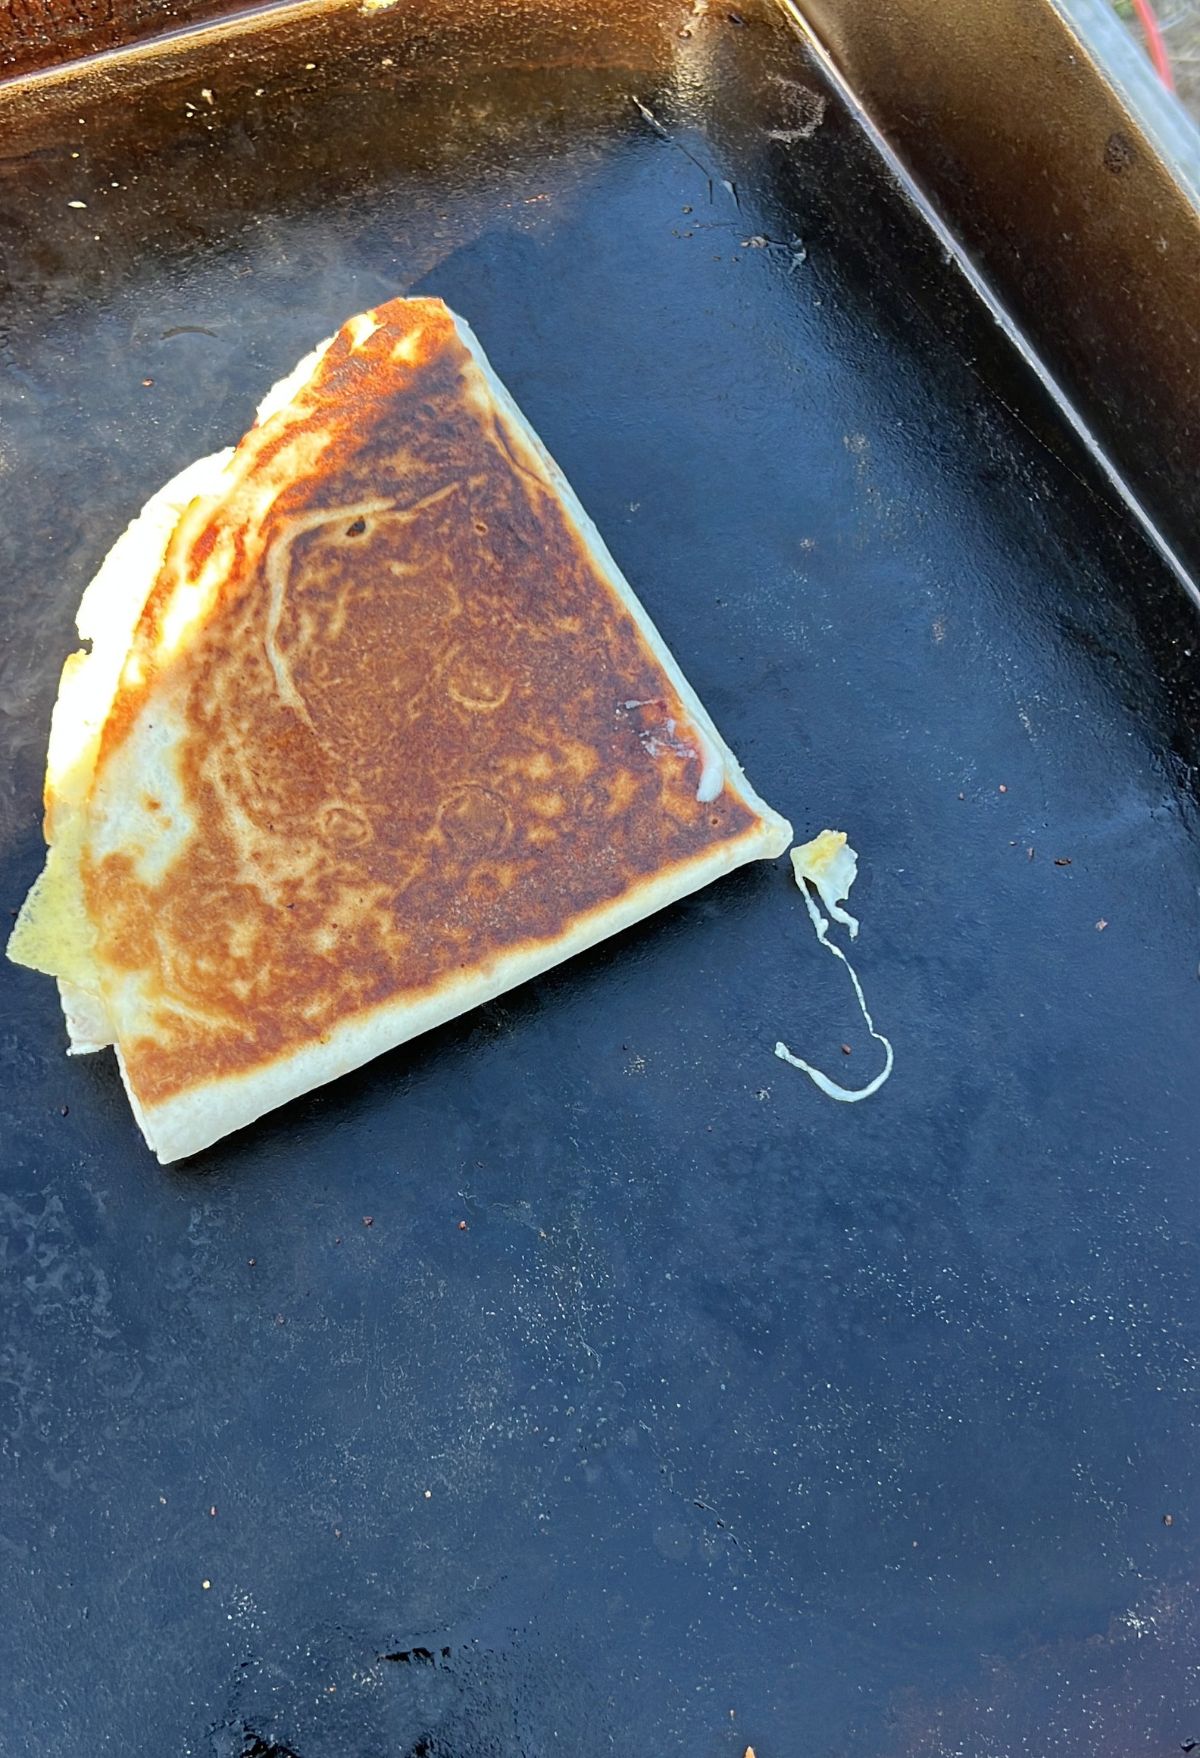 A golden-brown crepe folded on a cooking surface with some batter remnants.